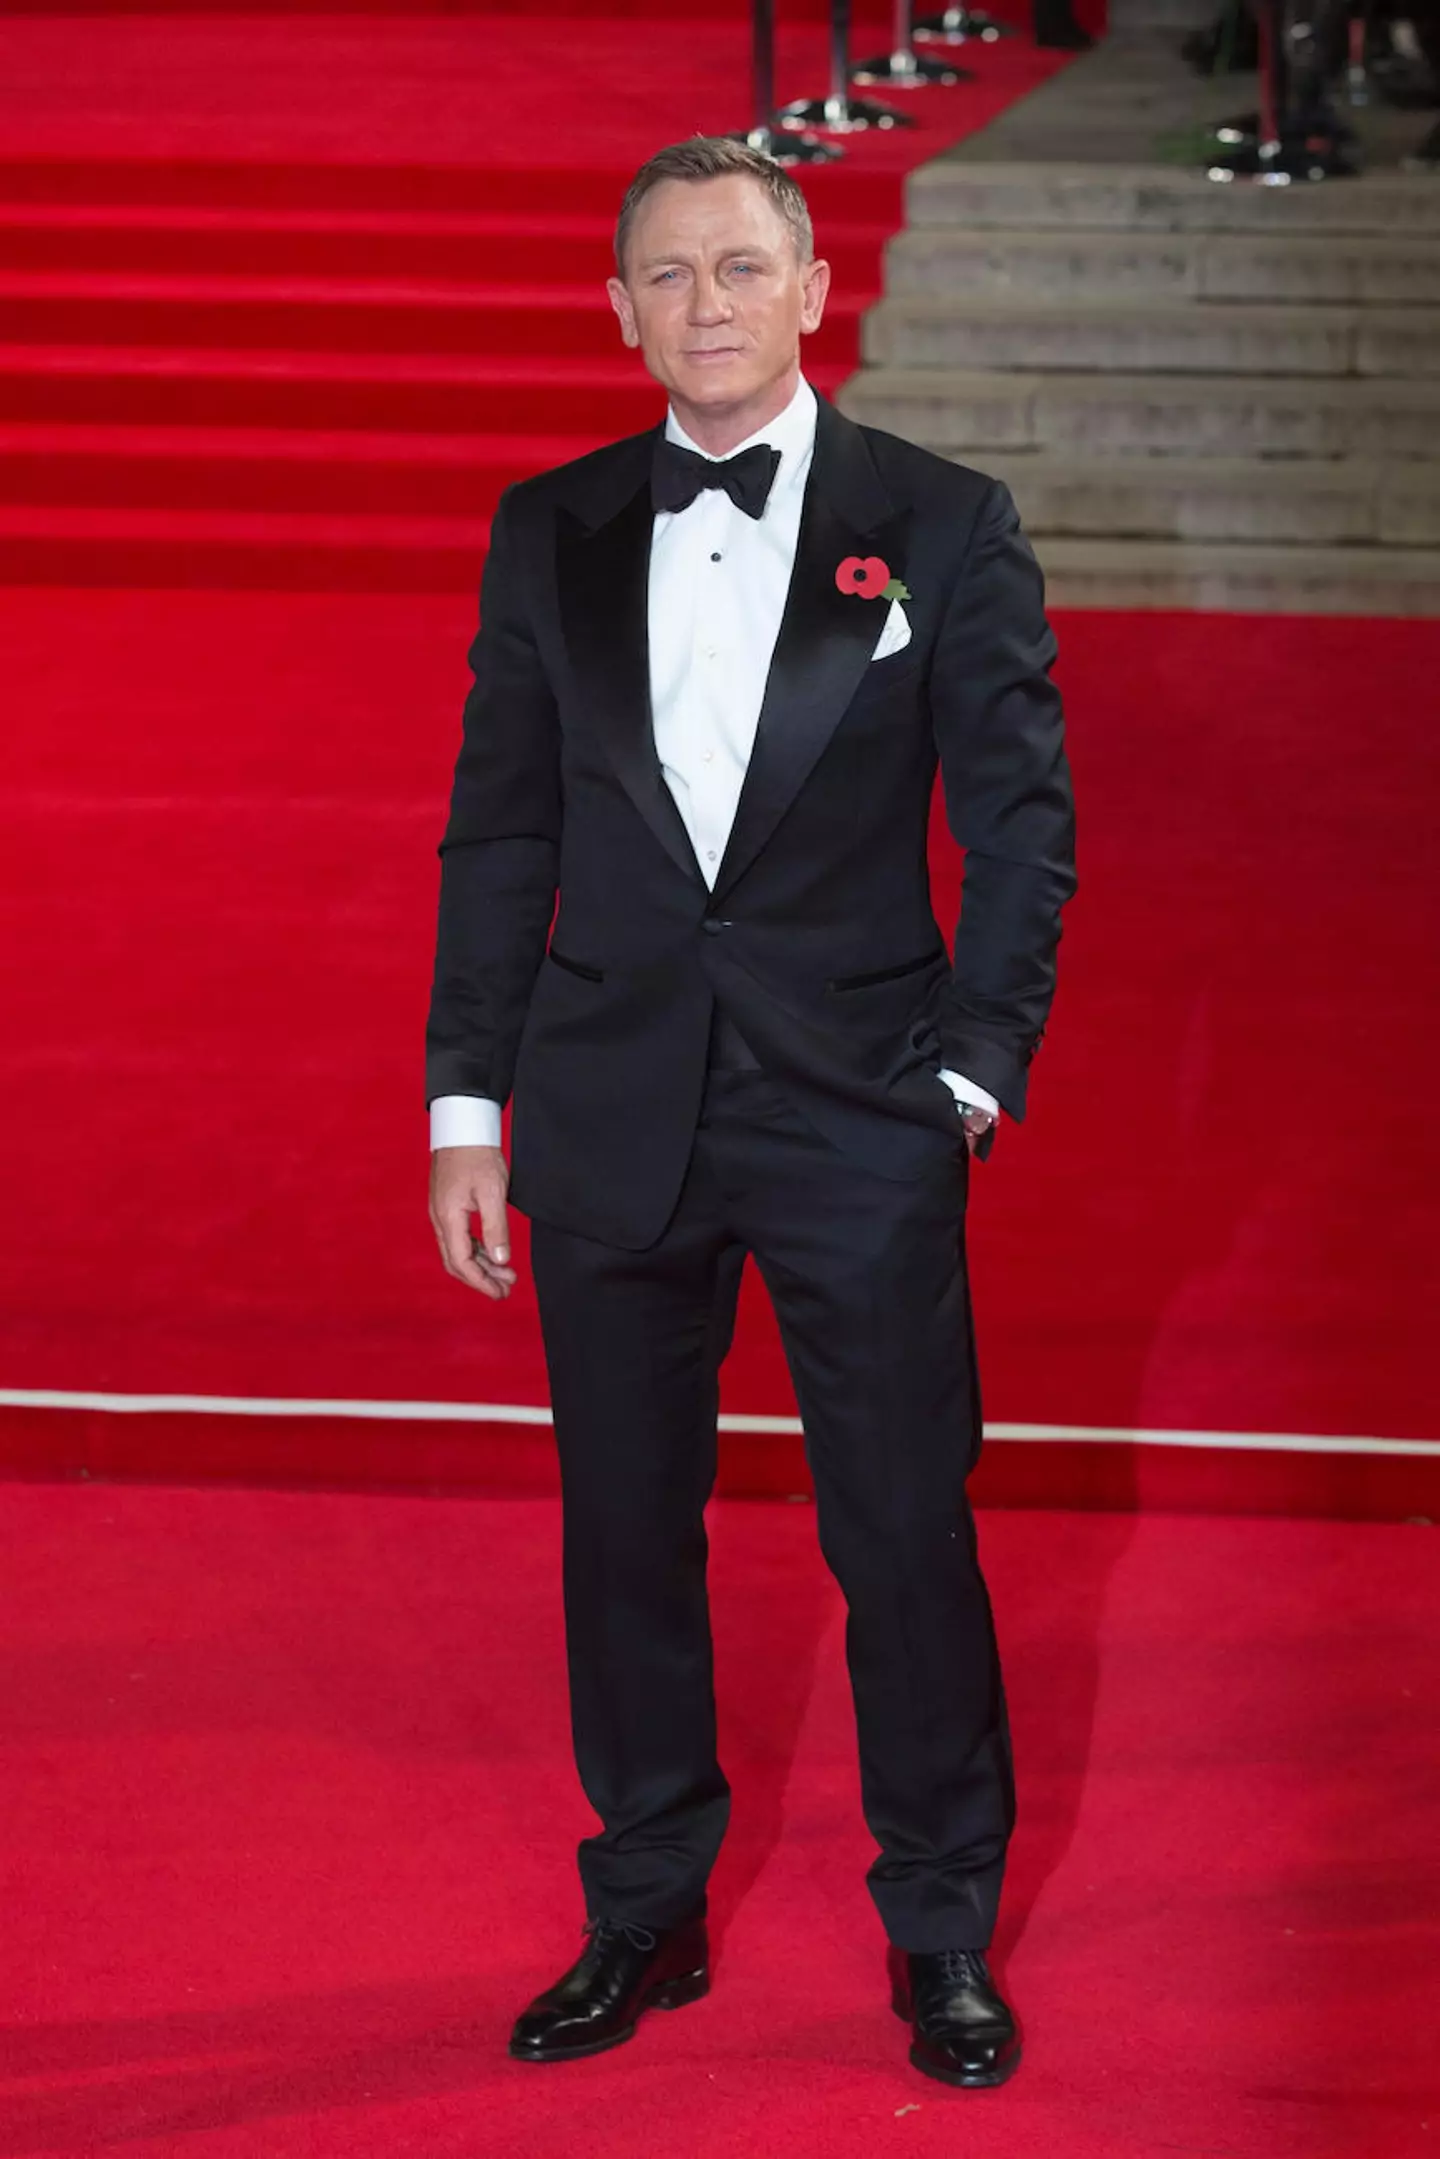 Actor Daniel Craig at the World Premiere of Spectre at the Royal Albert Hall in 2015.